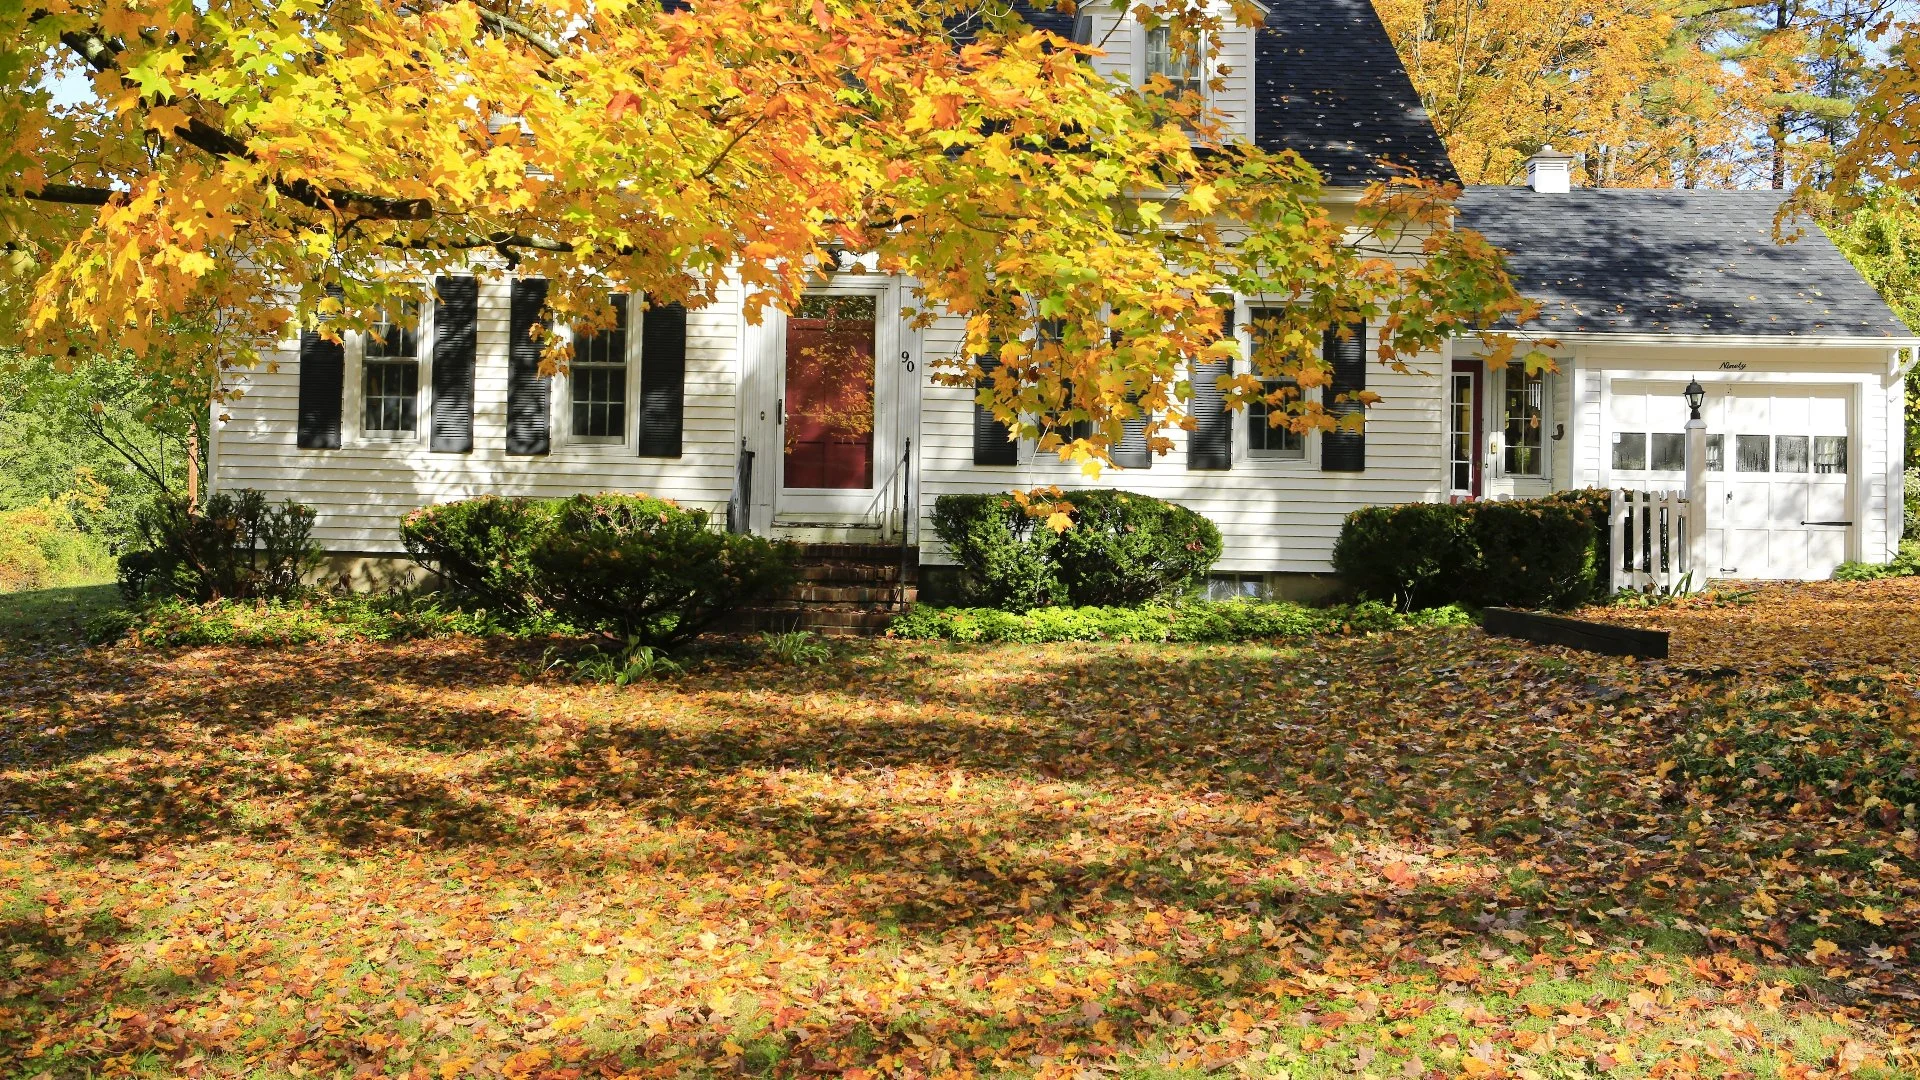 What Will Leaves Do to Your Grass if They’re Left on Your Lawn All Winter?